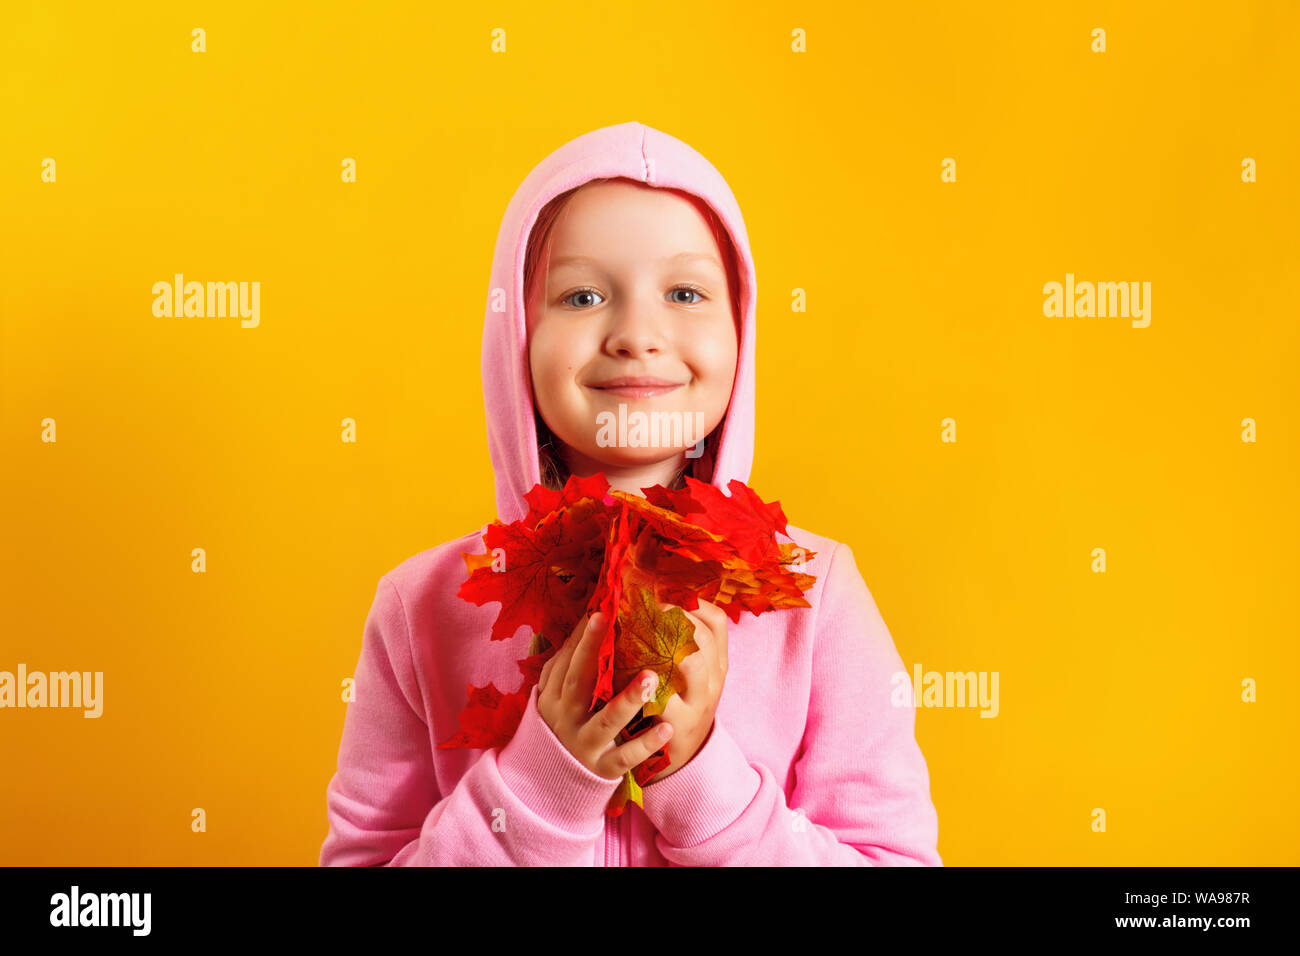 Cute little girl with an armful of autumn maple leaves on a yellow background Stock Photo